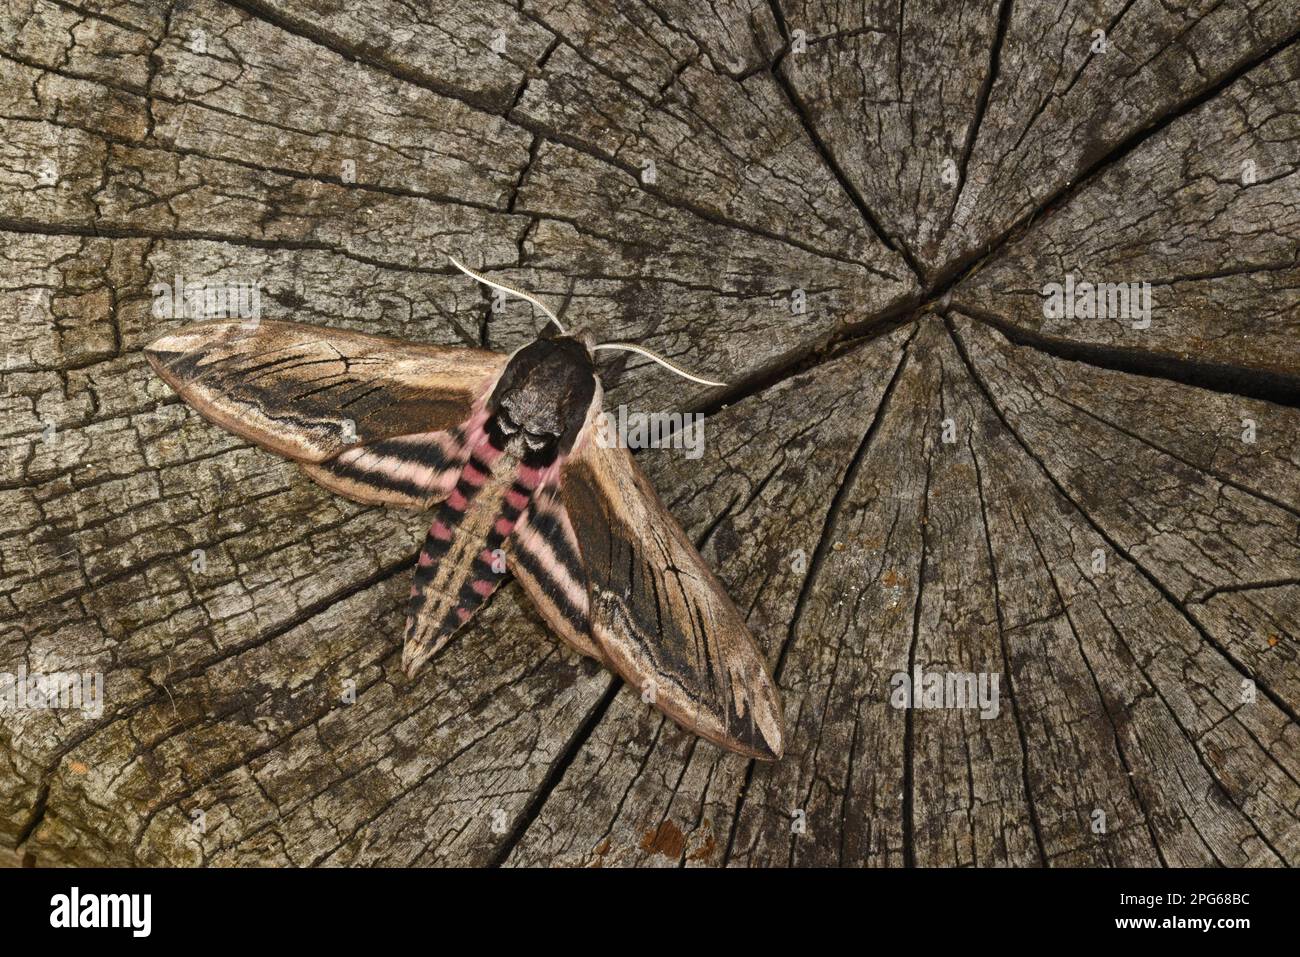 Privet Hawkmoth (Sphinx ligustri) adult, in defensive posture with rear wings spread, resting on stump, Oxfordshire, England, United Kingdom Stock Photo